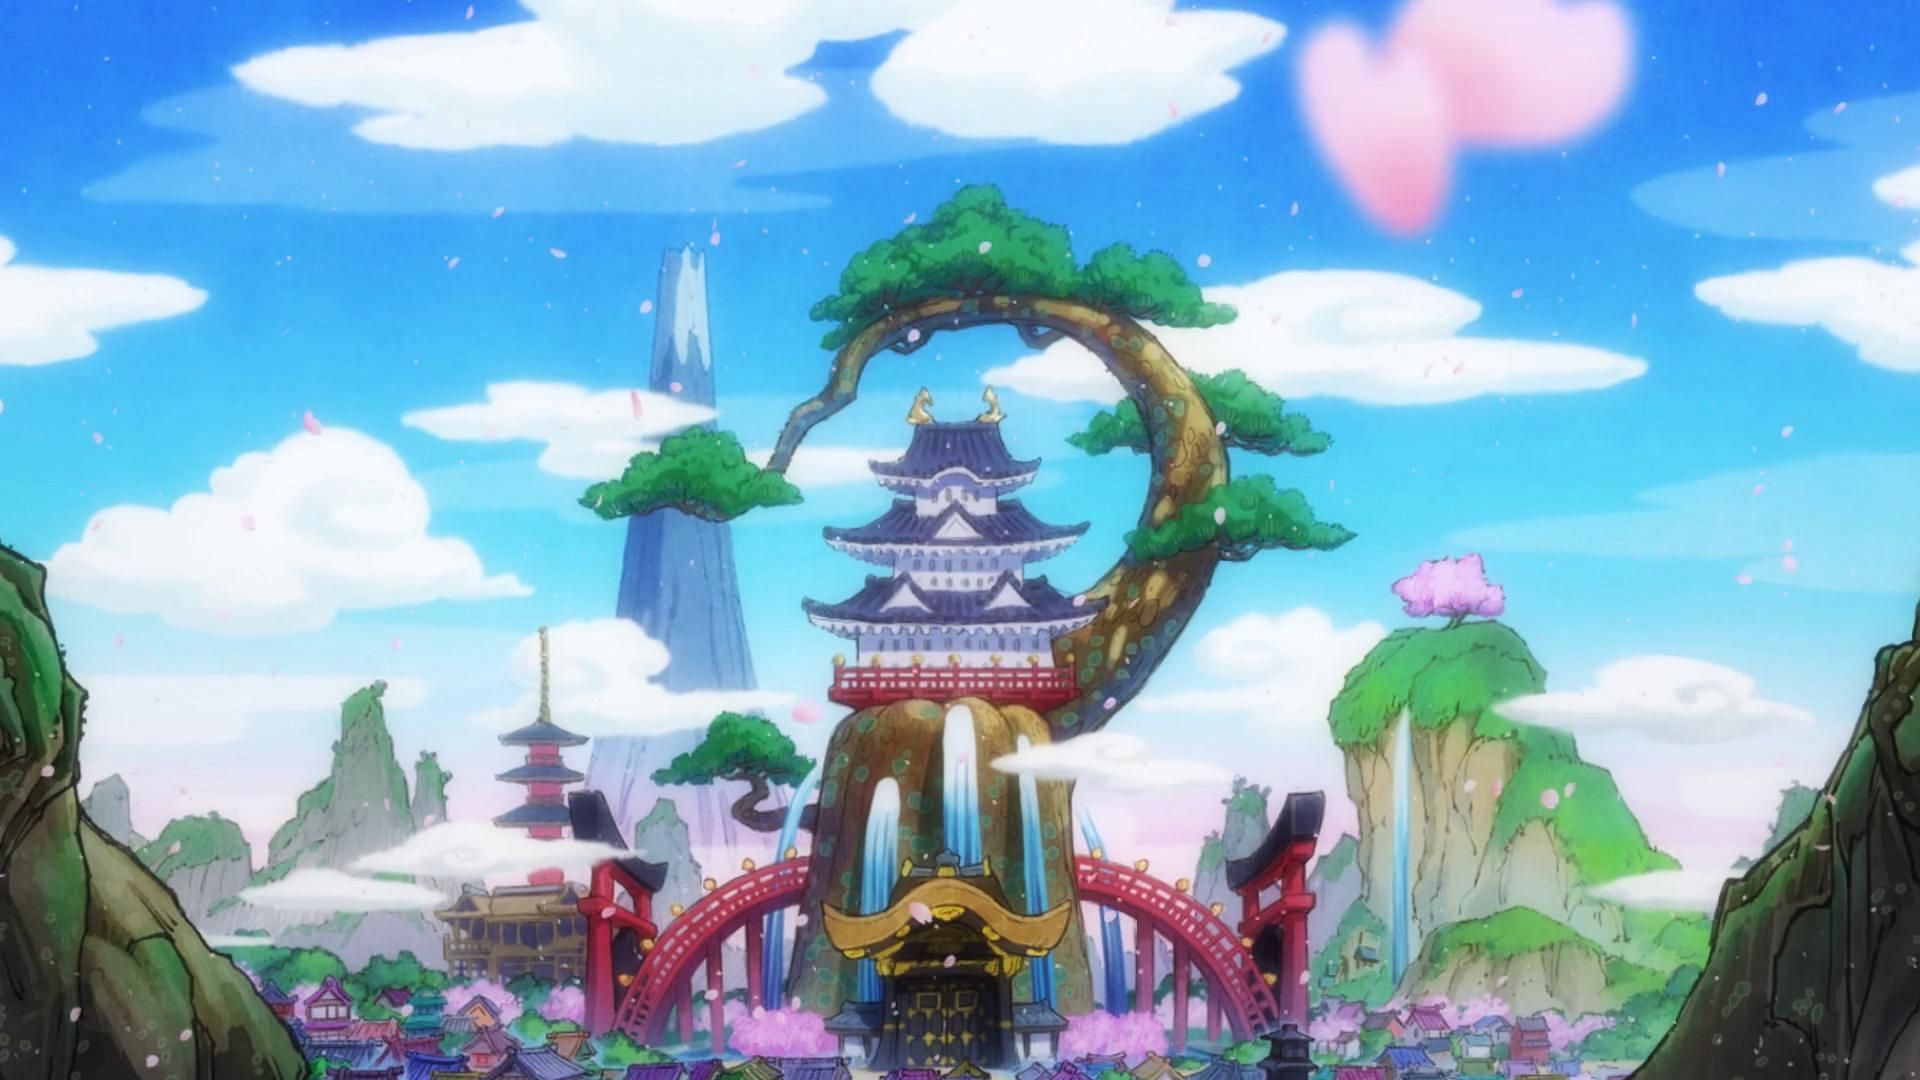 The Flower Capital of Wano as seen in the series&#039; anime (Image via Toei Animation)